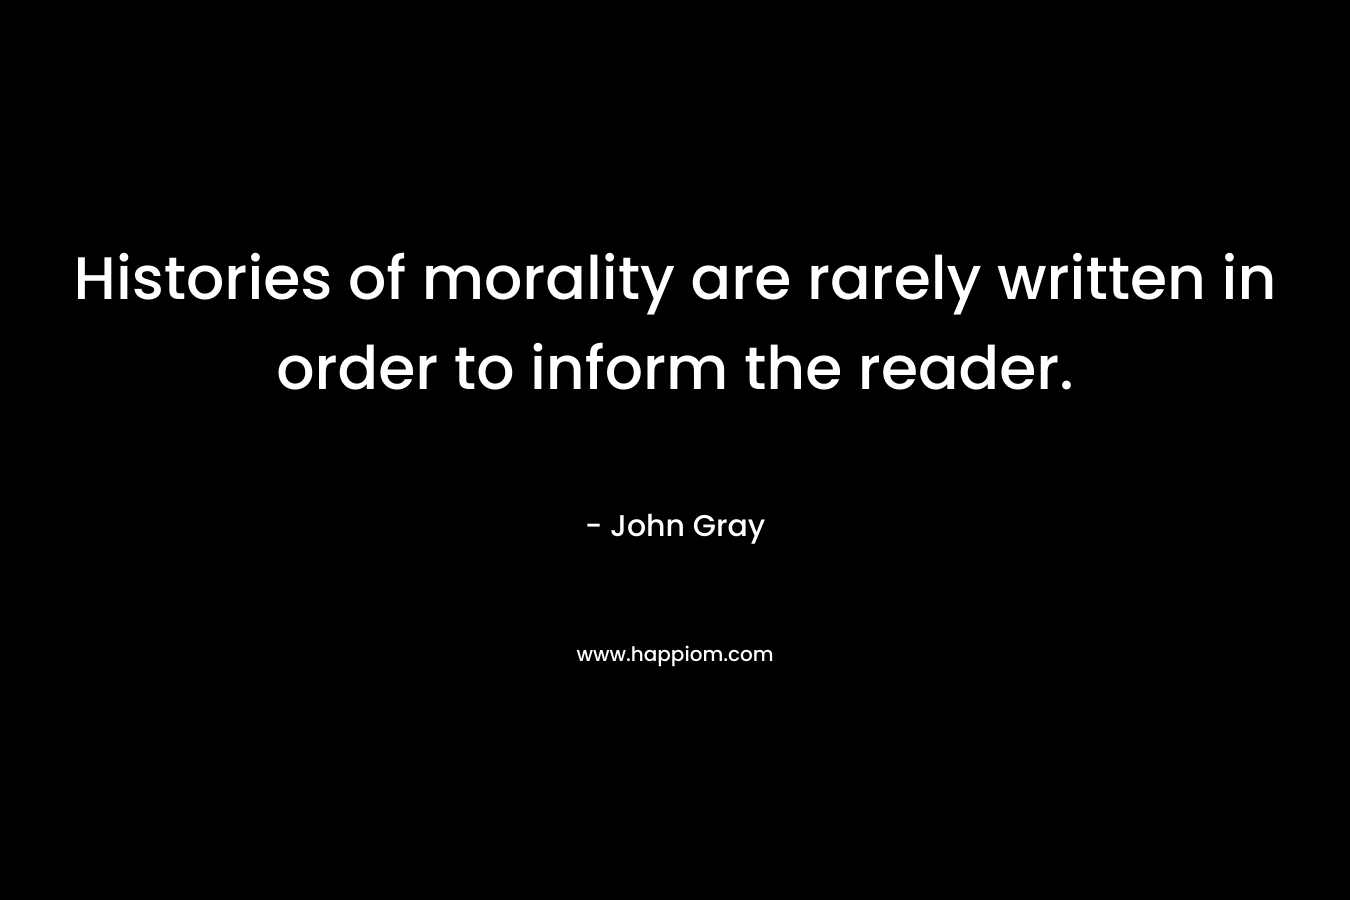 Histories of morality are rarely written in order to inform the reader.